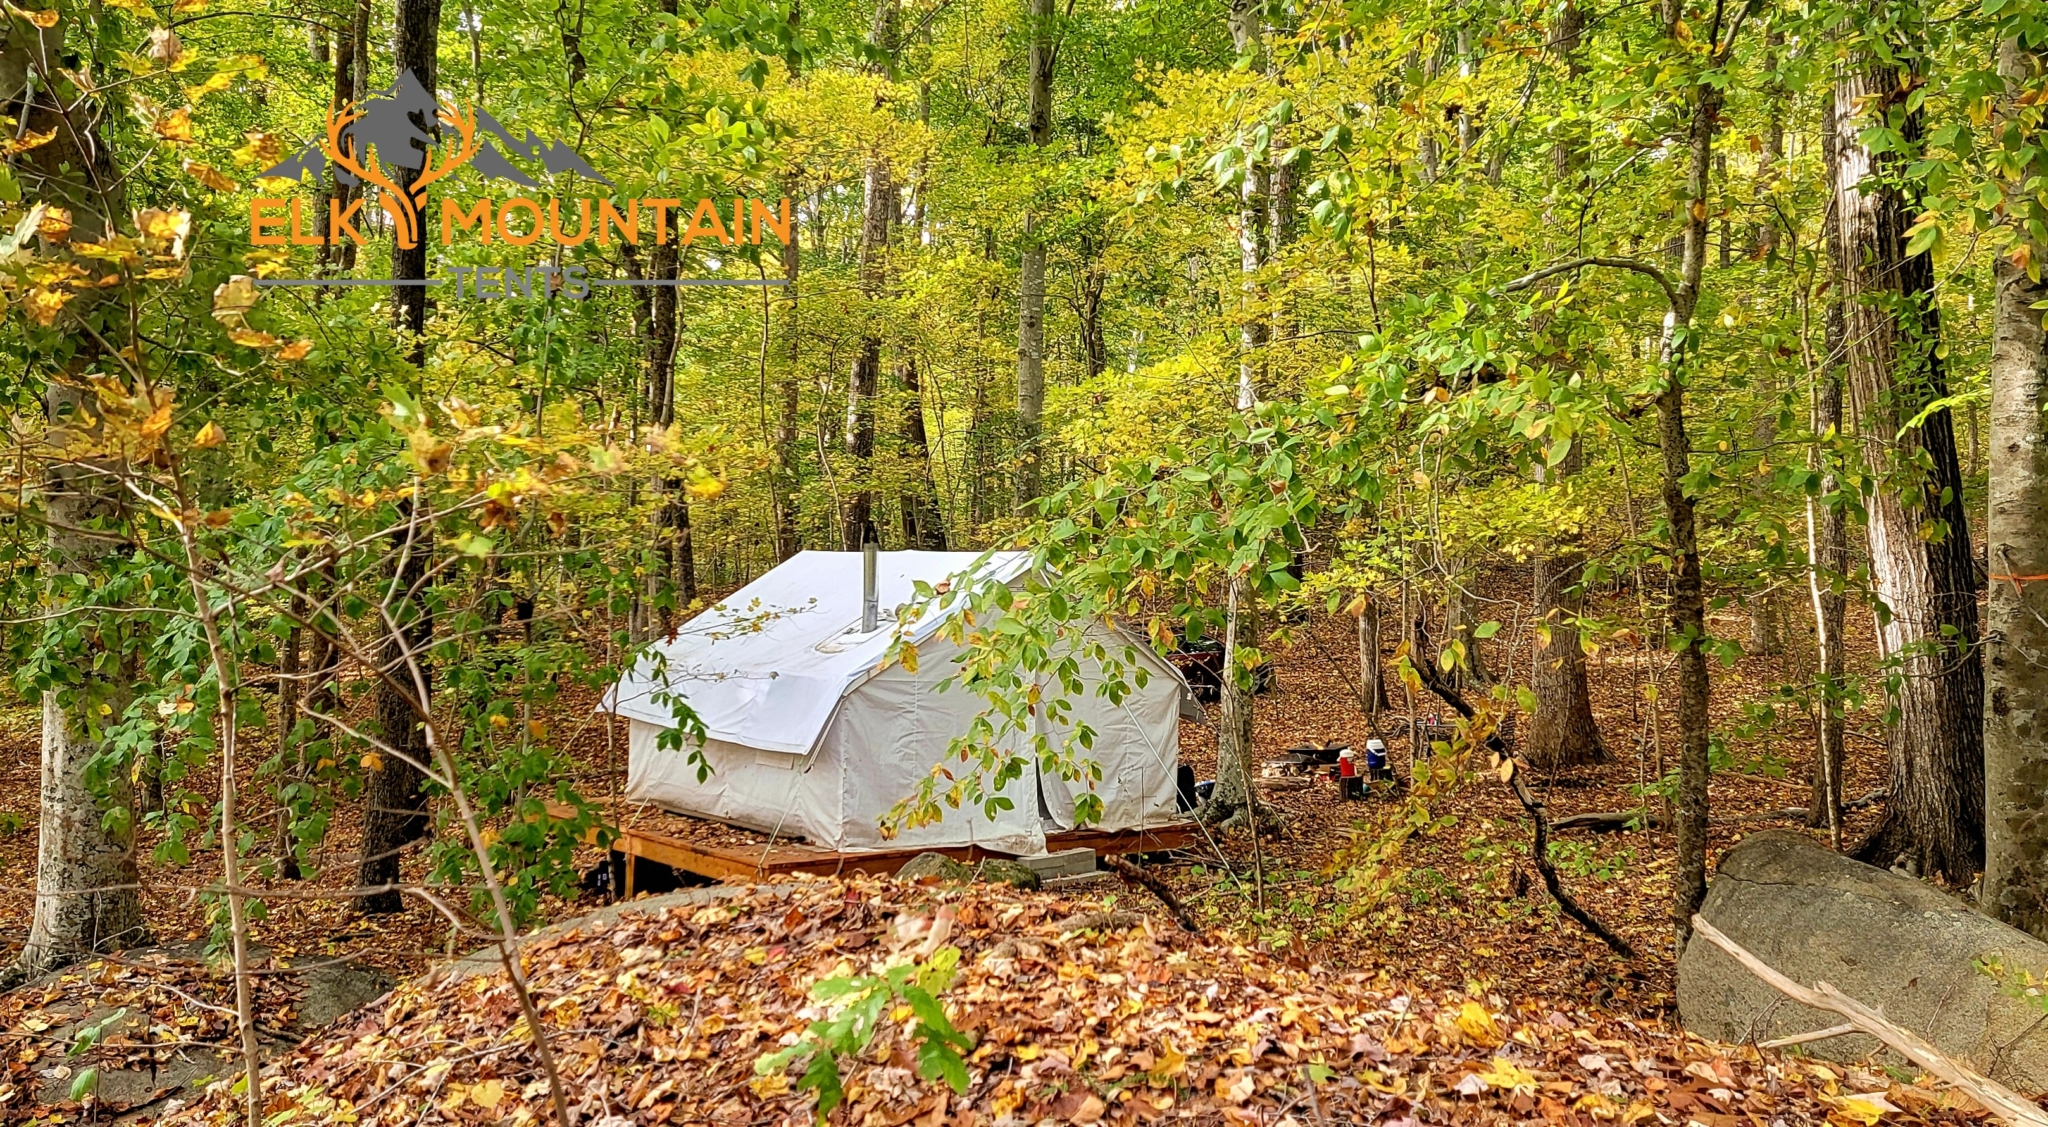 4 season tent
canvas wall tent
tent stove
living in a tent
hunting tents
canvas tents for sale
outfitter tents
polyester vs cotton
outfitter tents
canvas tent with stove
wall tents for sale
tent with stove jack
montana canvas
